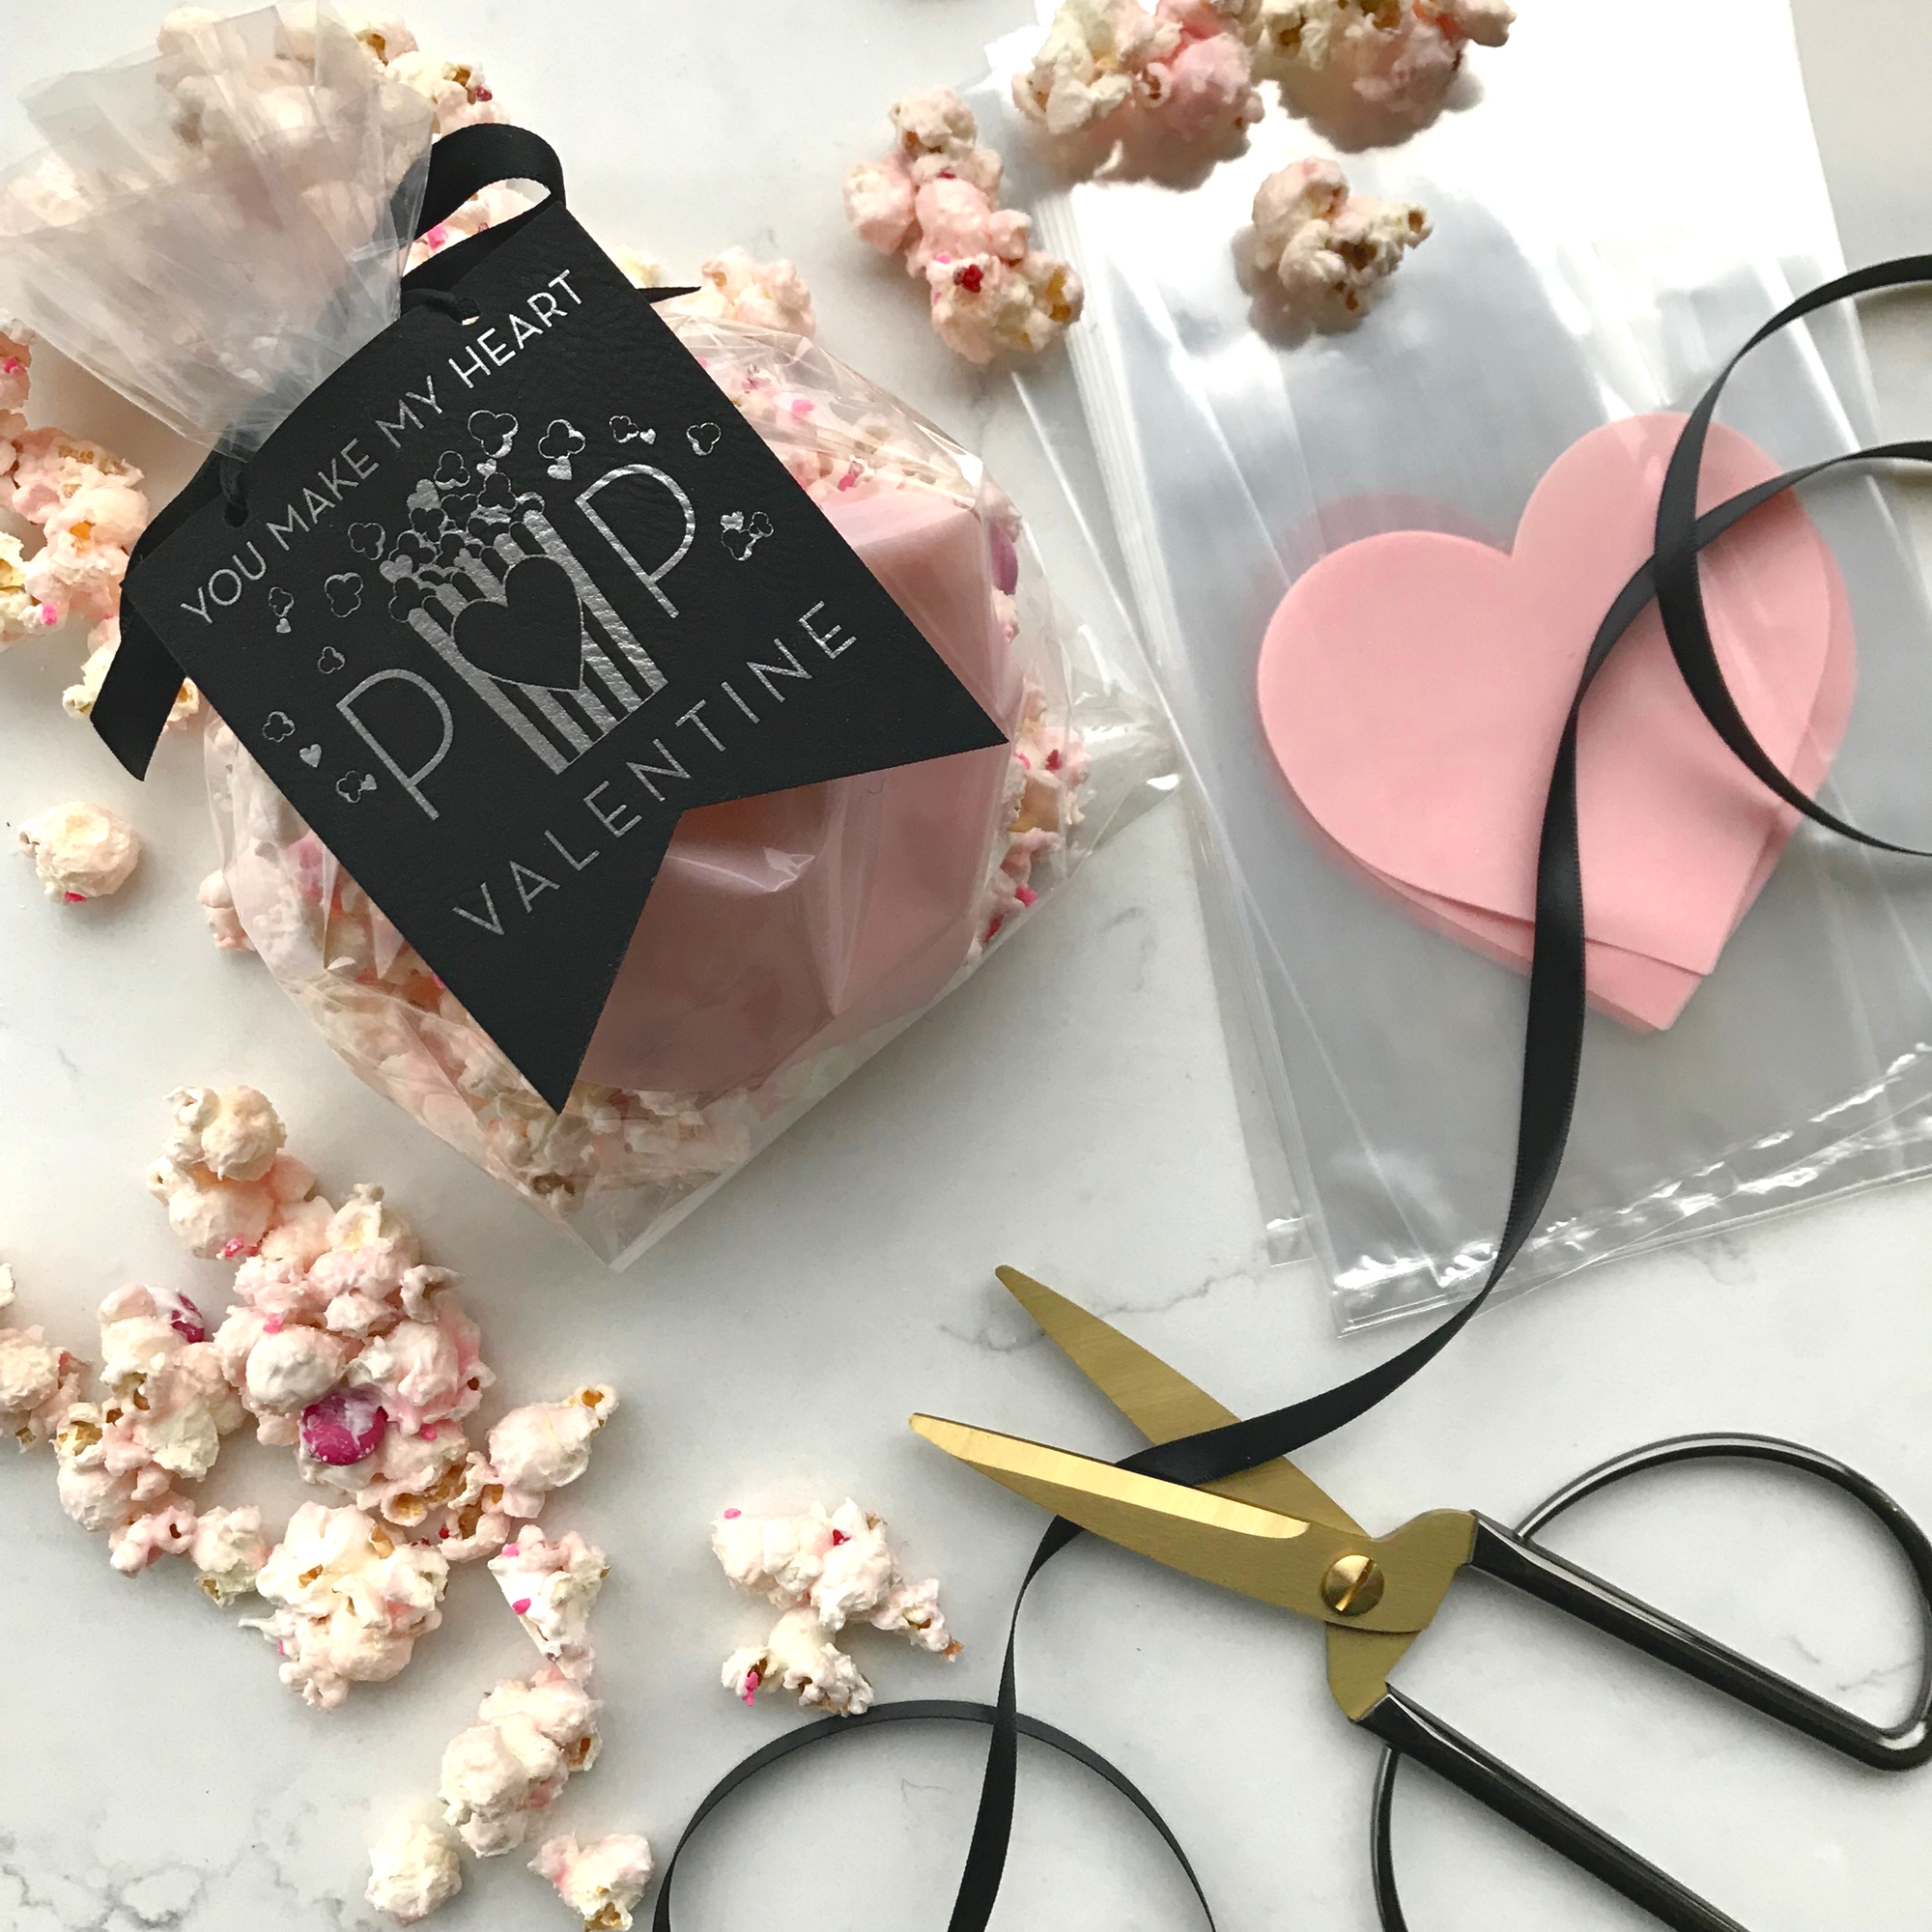 Heart Pop Gift Tags